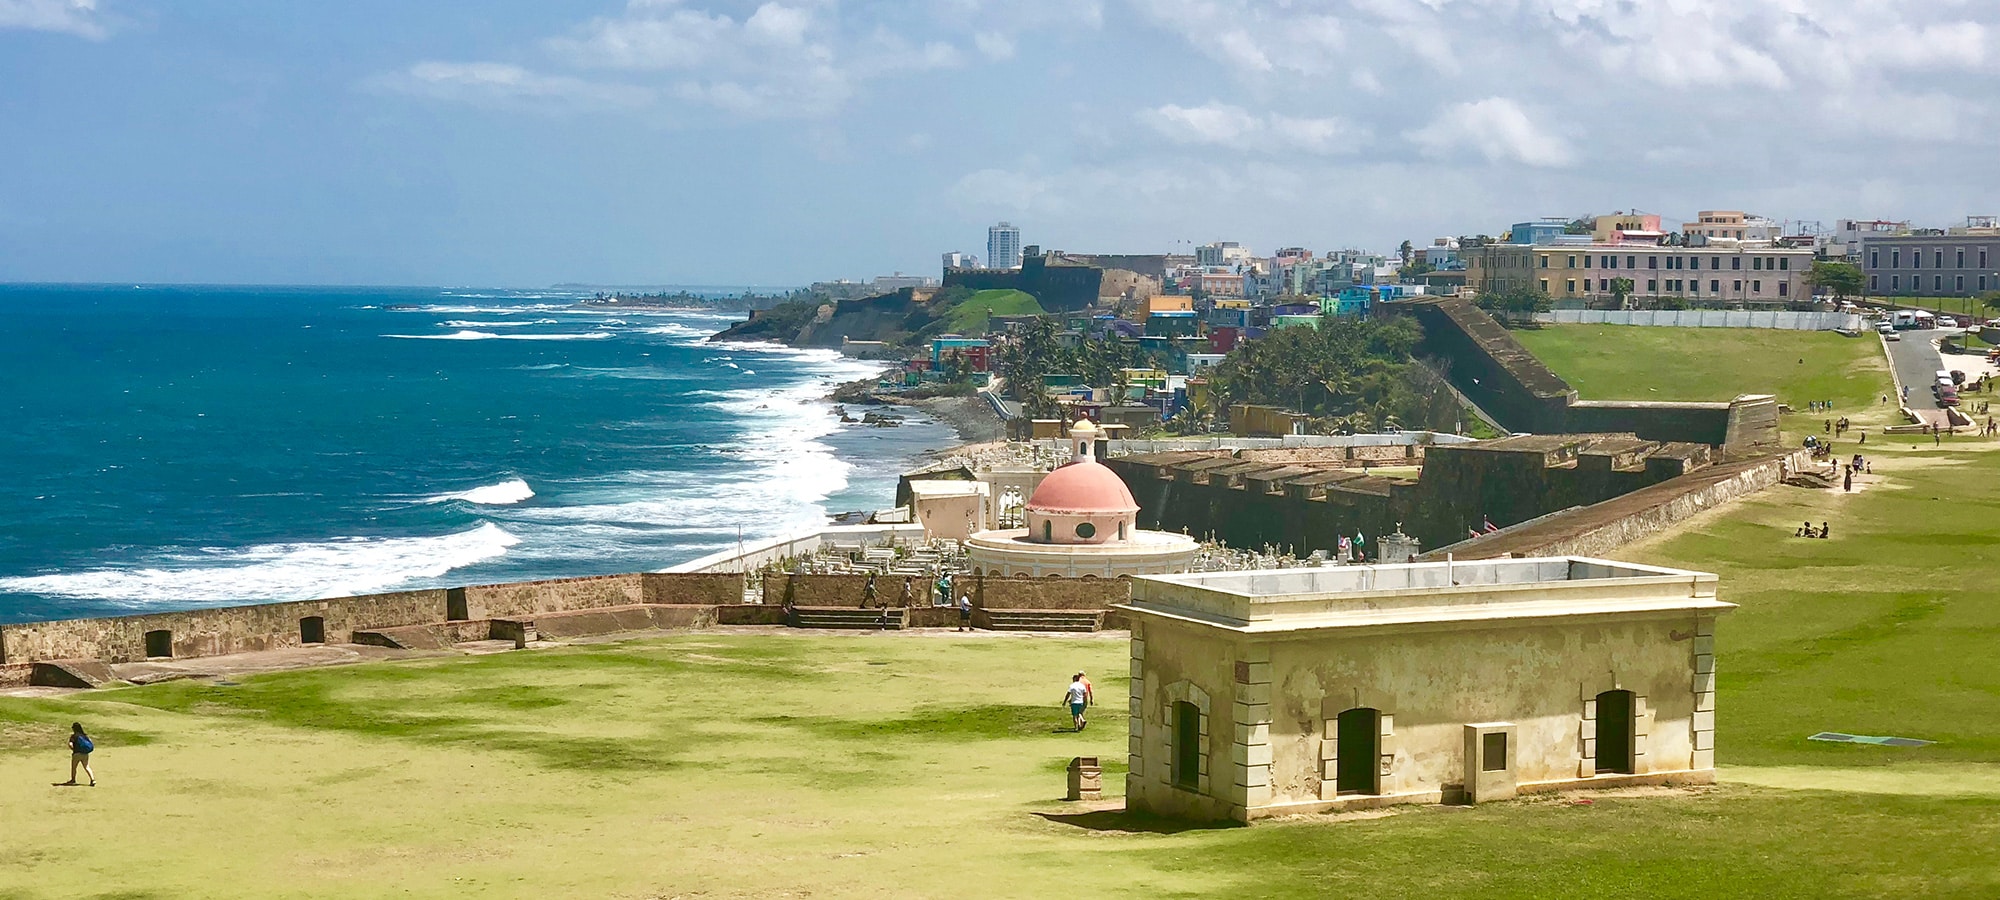 We recently traveled to Puerto Rico to see how the island is recovering from last year’s hurricanes. Here’s what we learned.